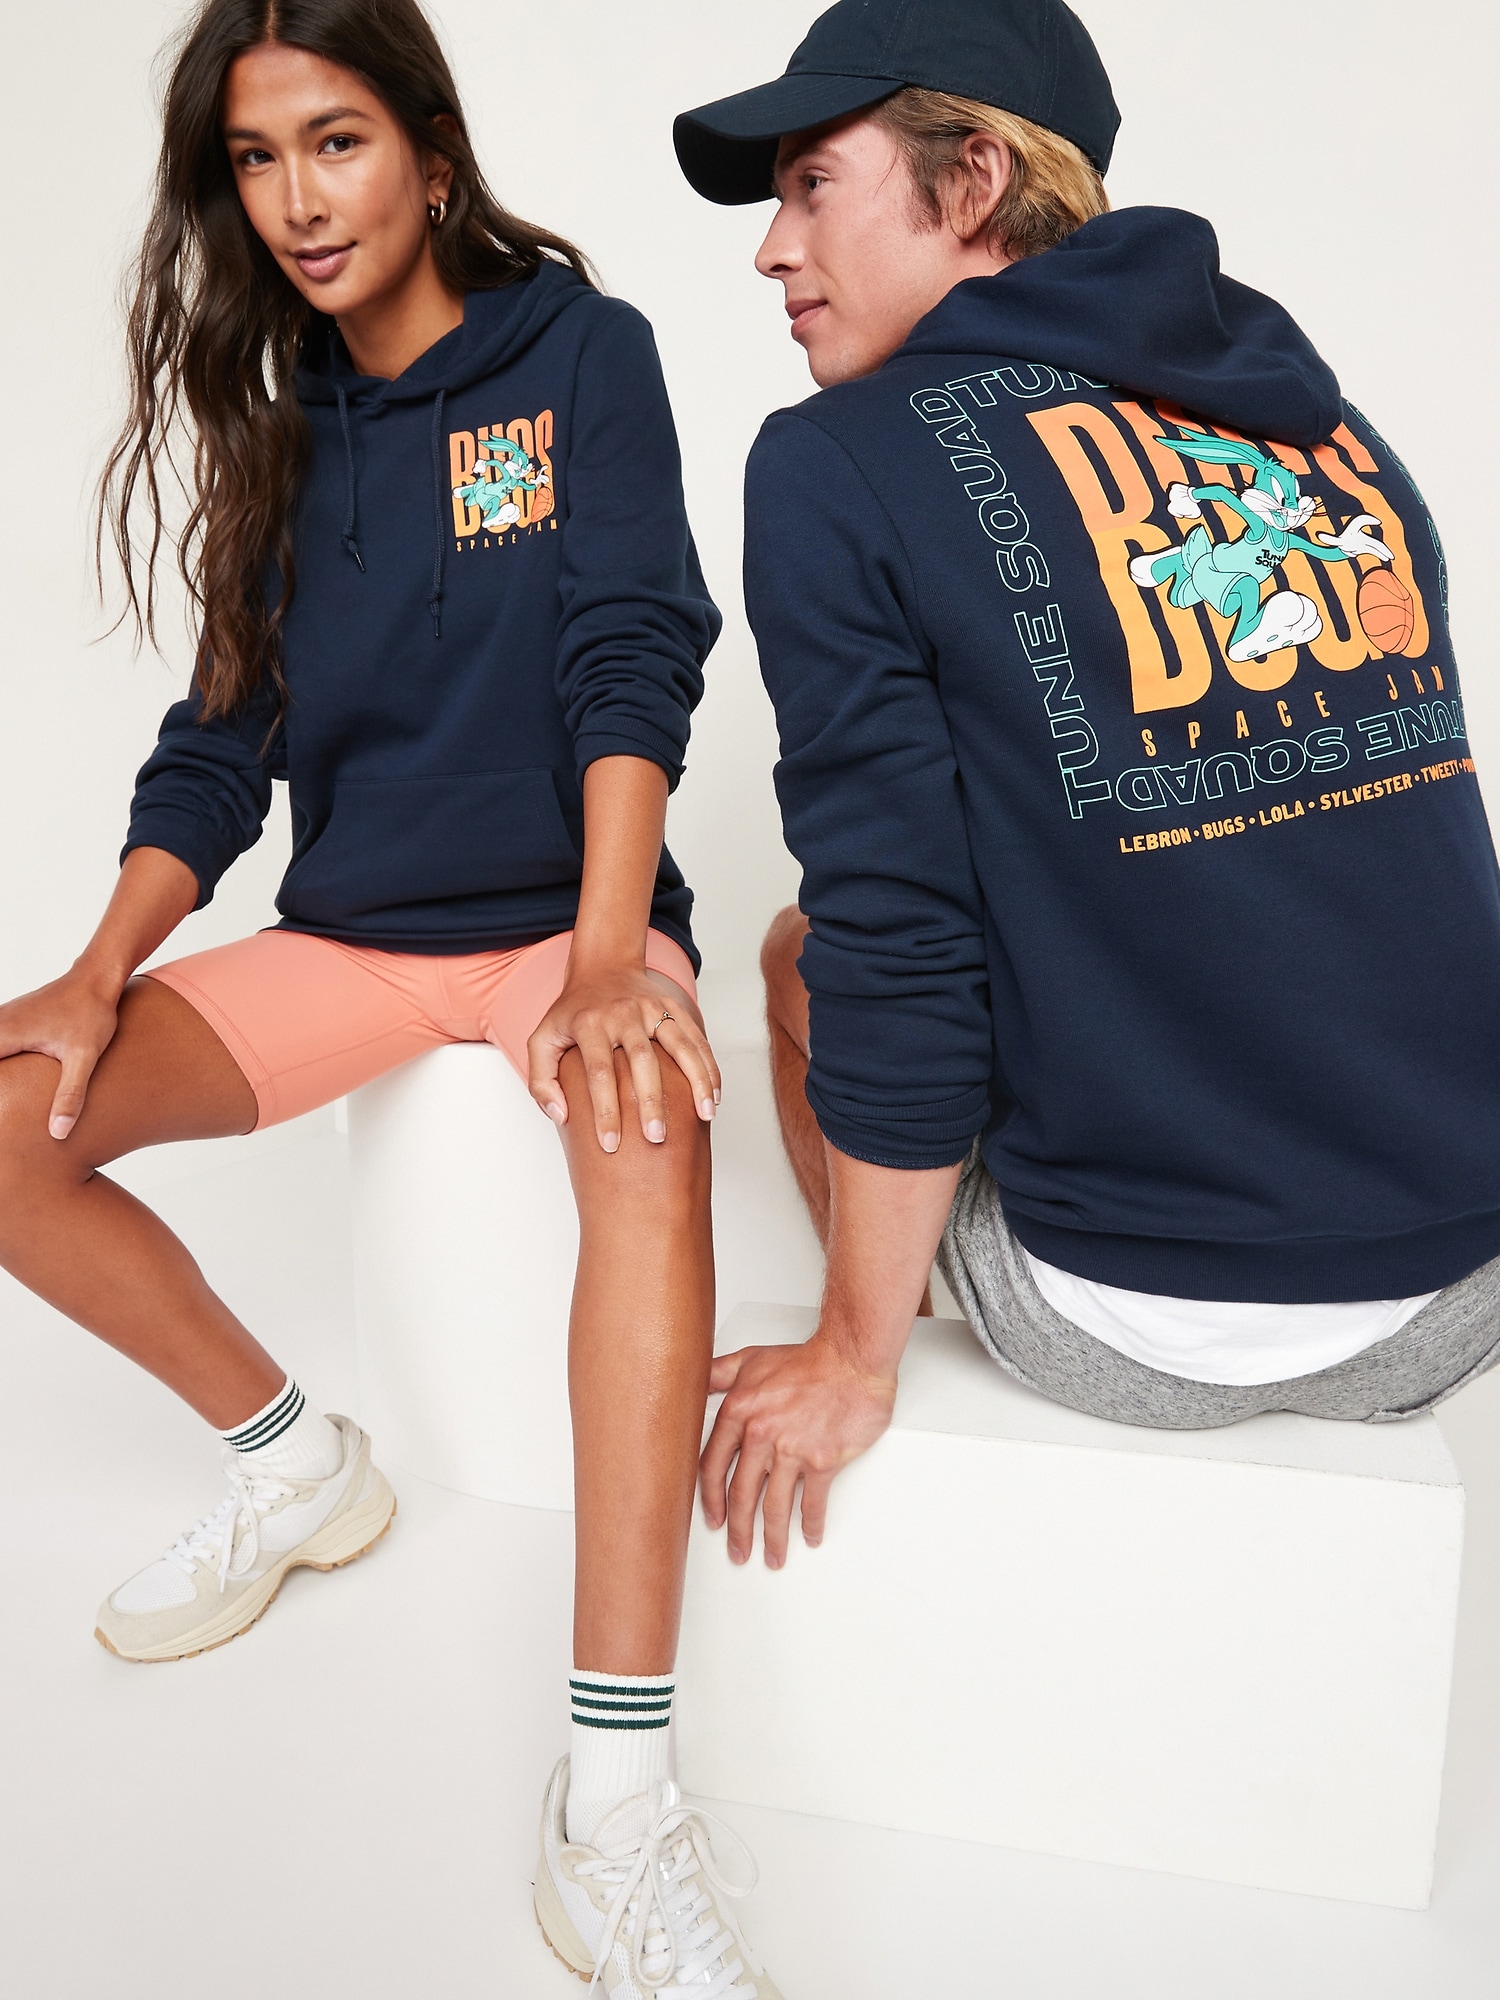 Space Jam A New Legacy™ Gender-Neutral Pullover Hoodie for Adults